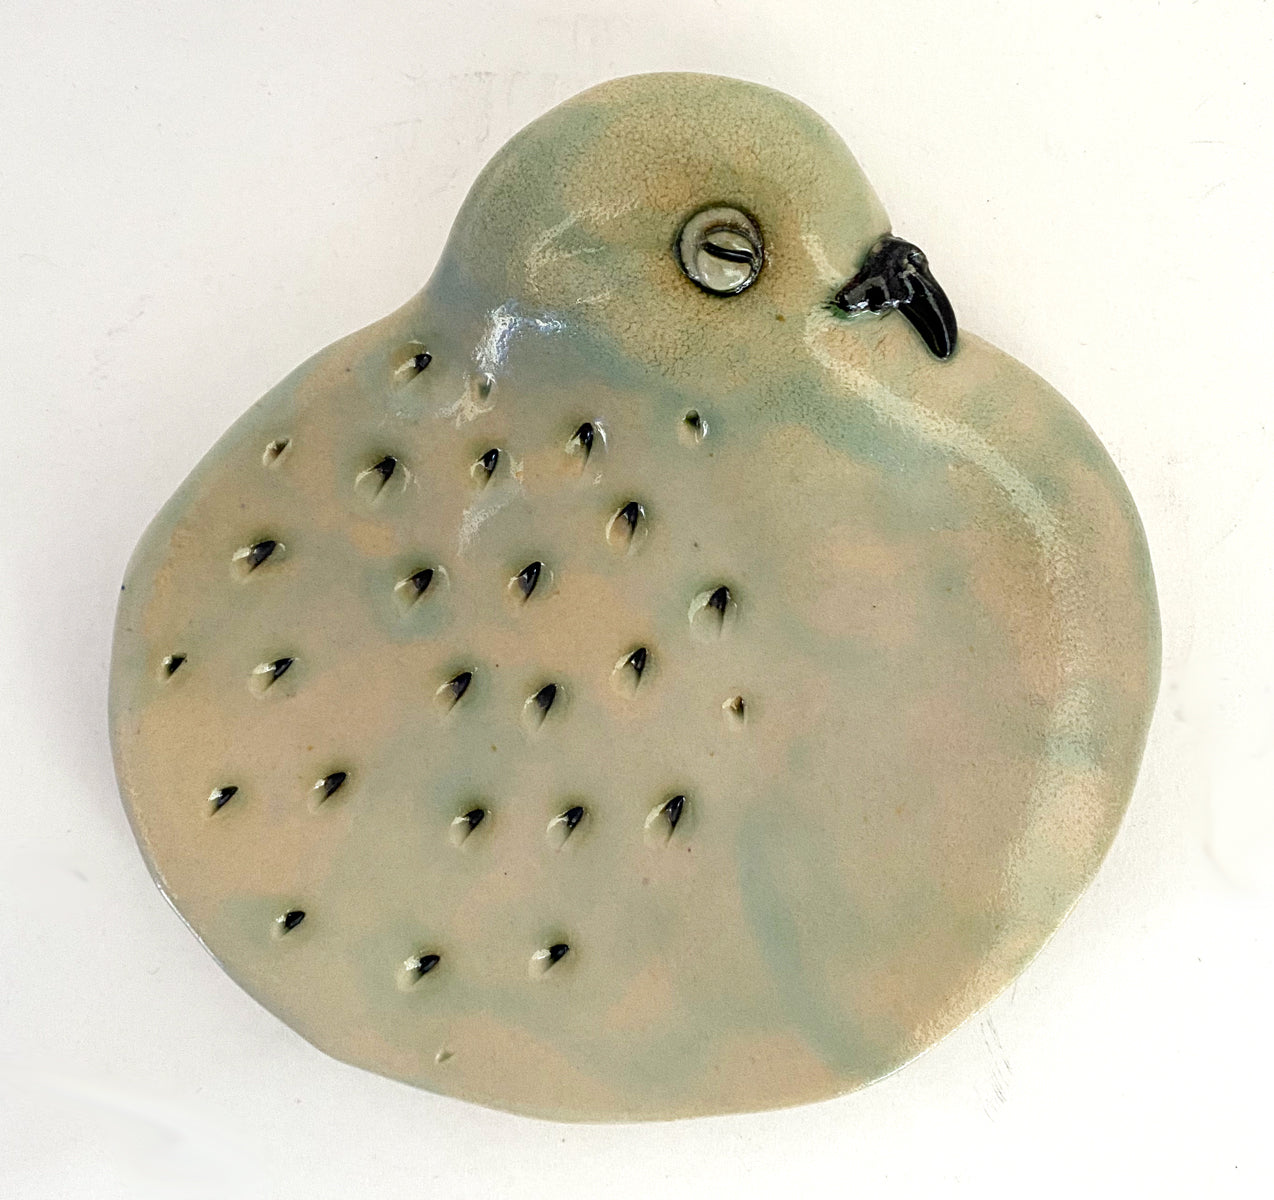 76. Mourning Dove Soap Dish